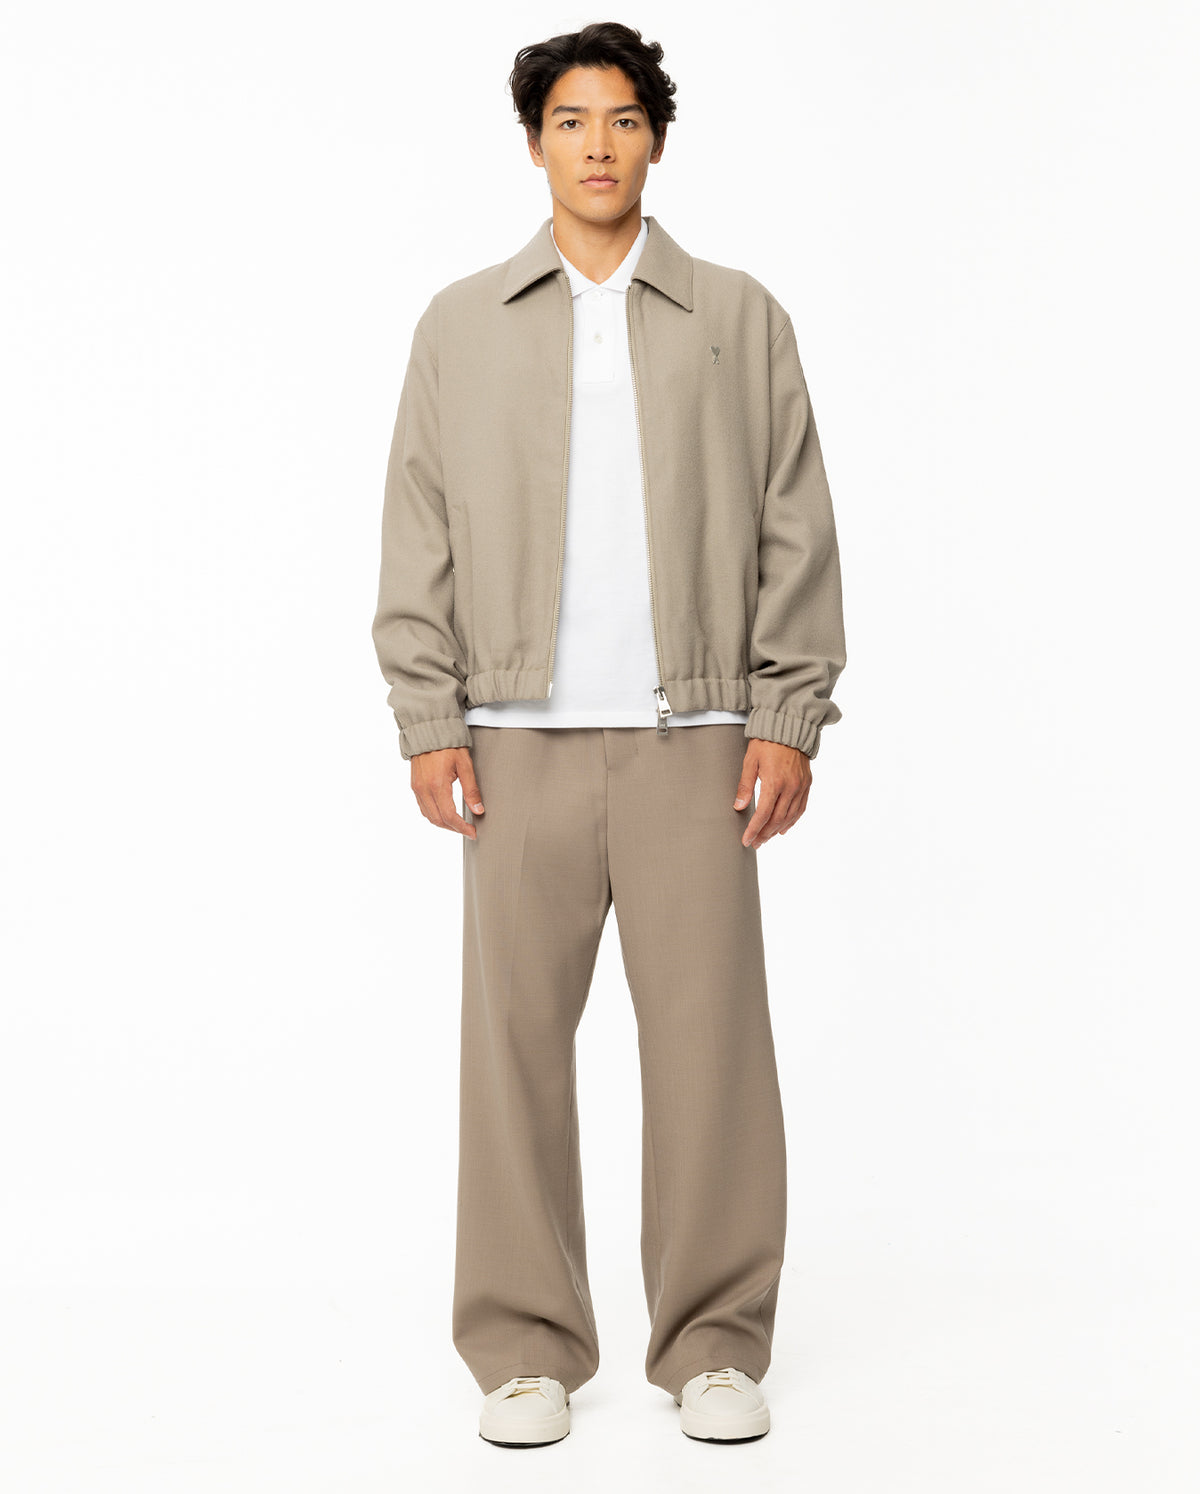 Adc Wool Zipped Jacket - Taupe